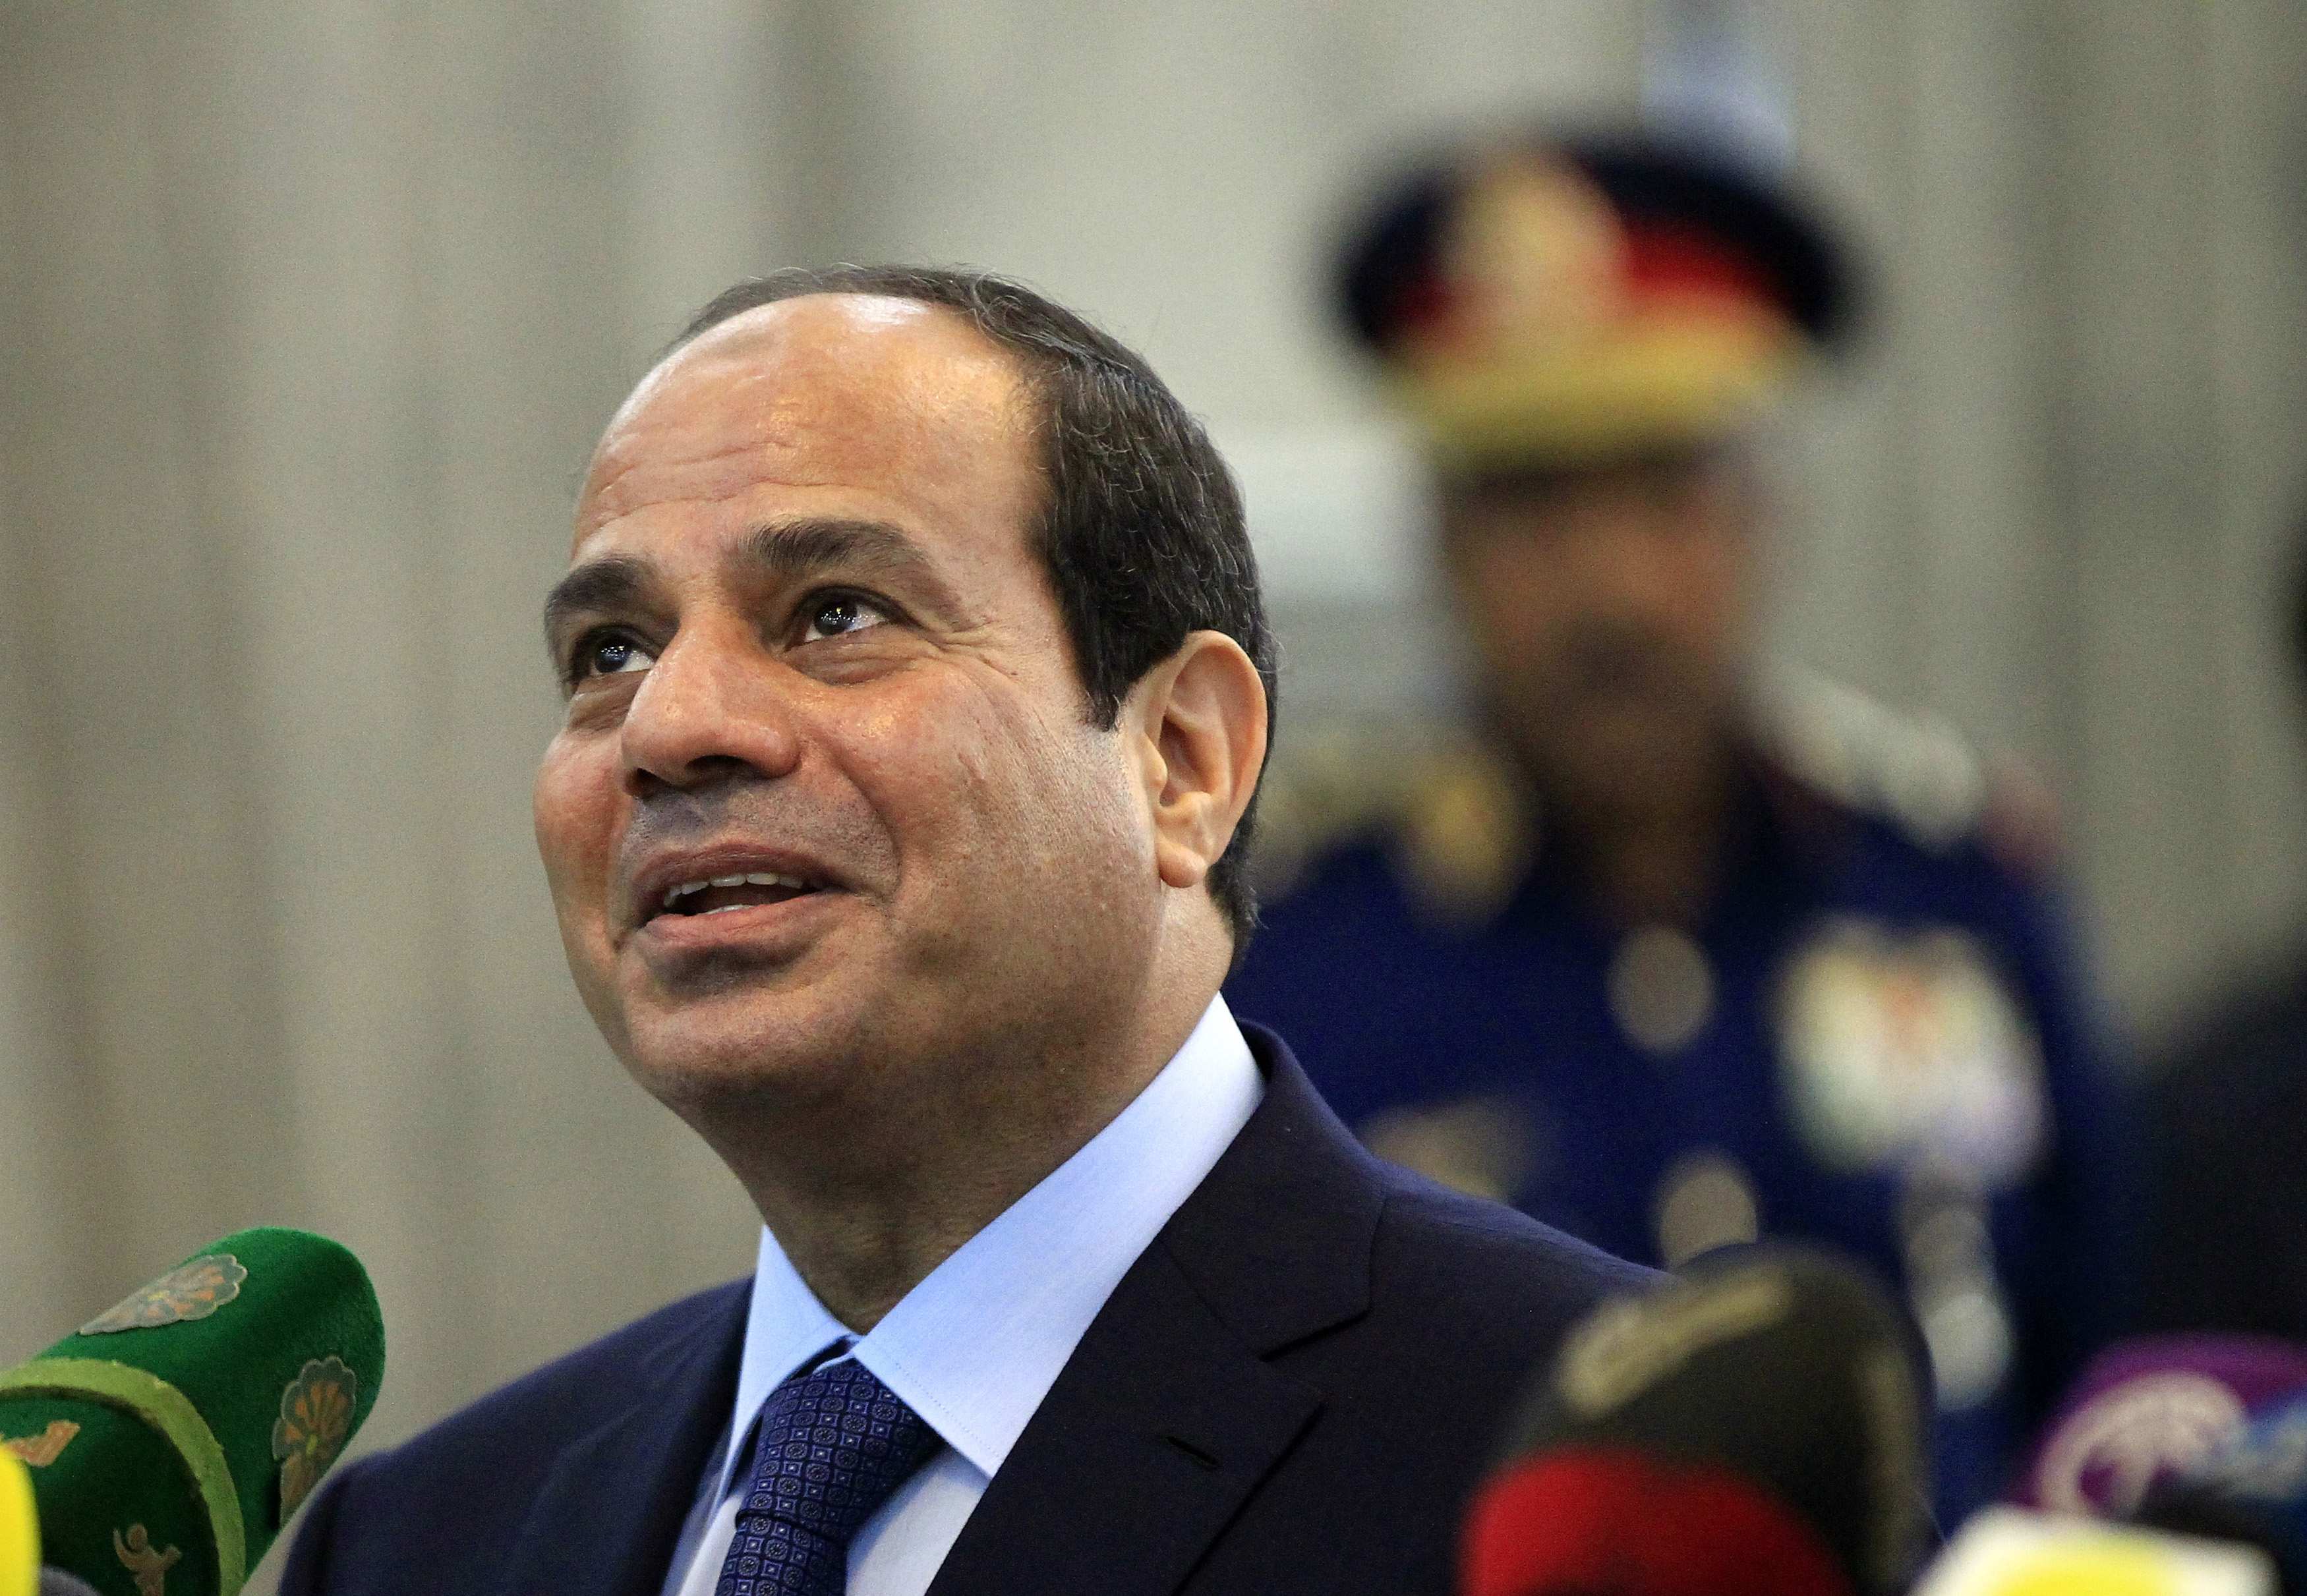 Egypt's Sisi Says Independence for Iraq's Kurds Would be 'Catastrophic'